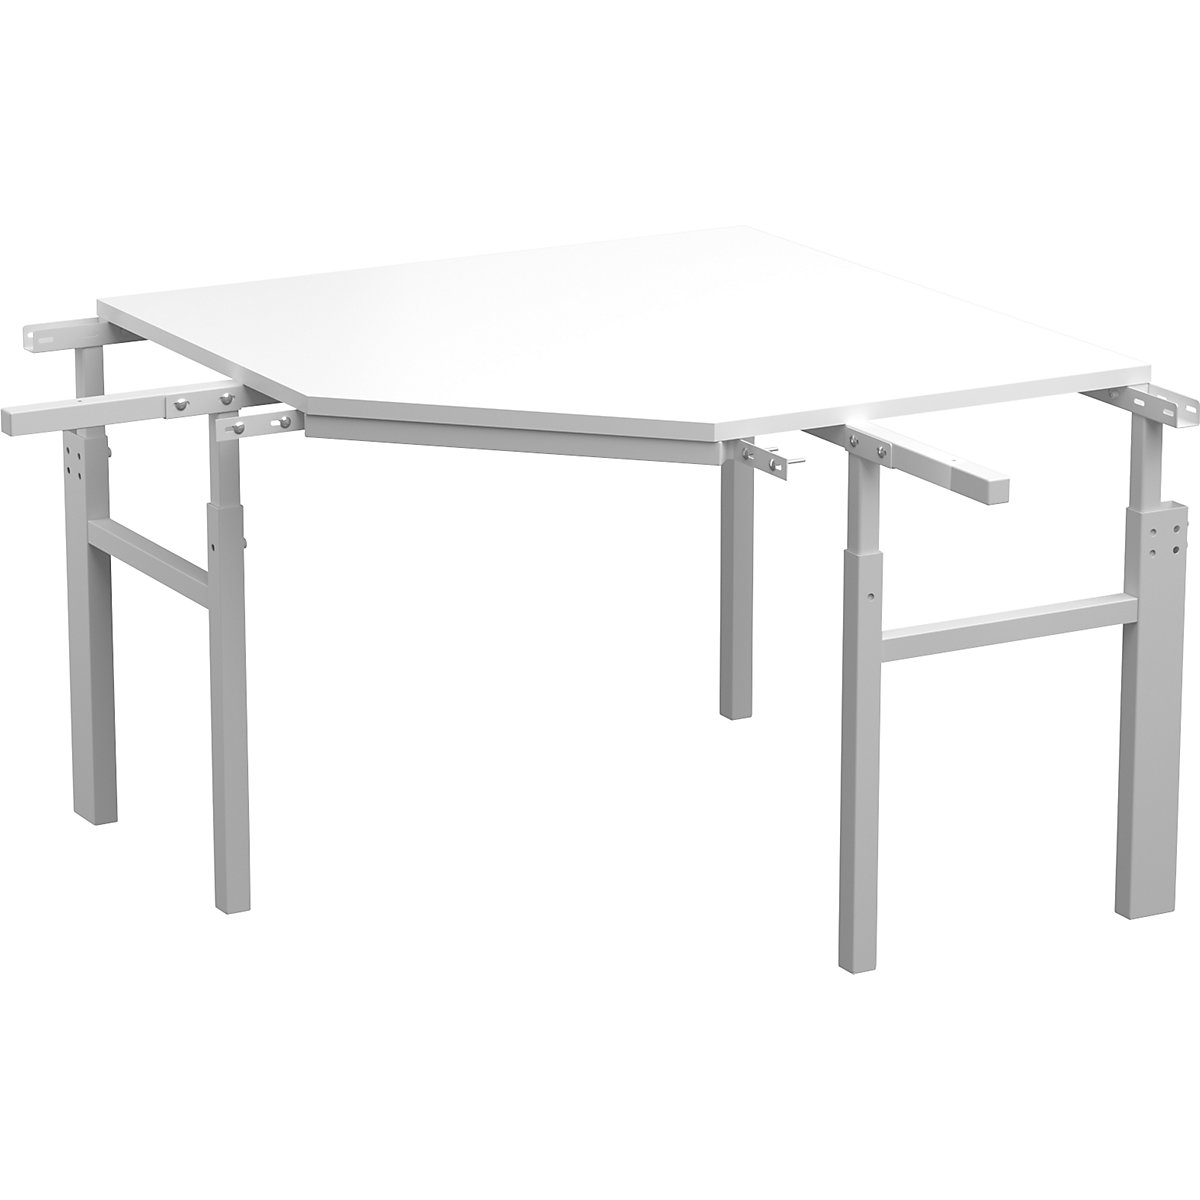 Series TP corner table – Treston, manual height adjustment, for 2 standard tables with add-on shelf, depth 700 mm-3